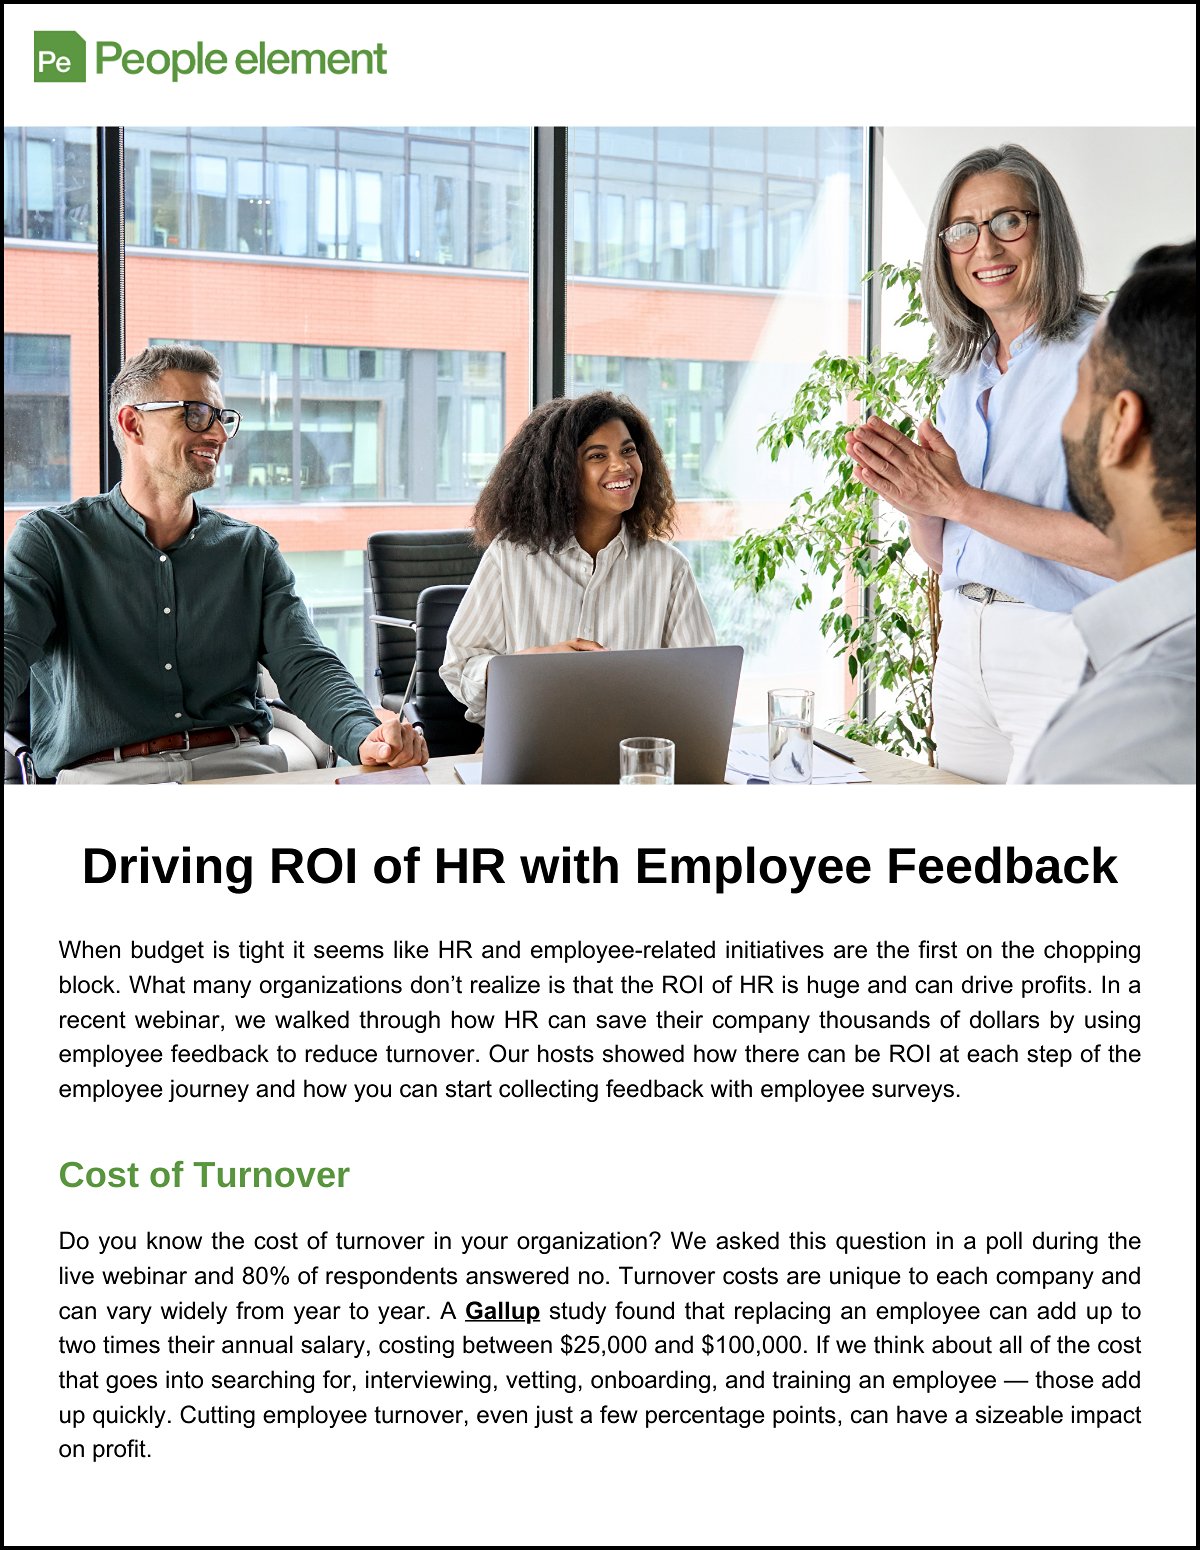 Driving the ROI of HR with Employee Feedback